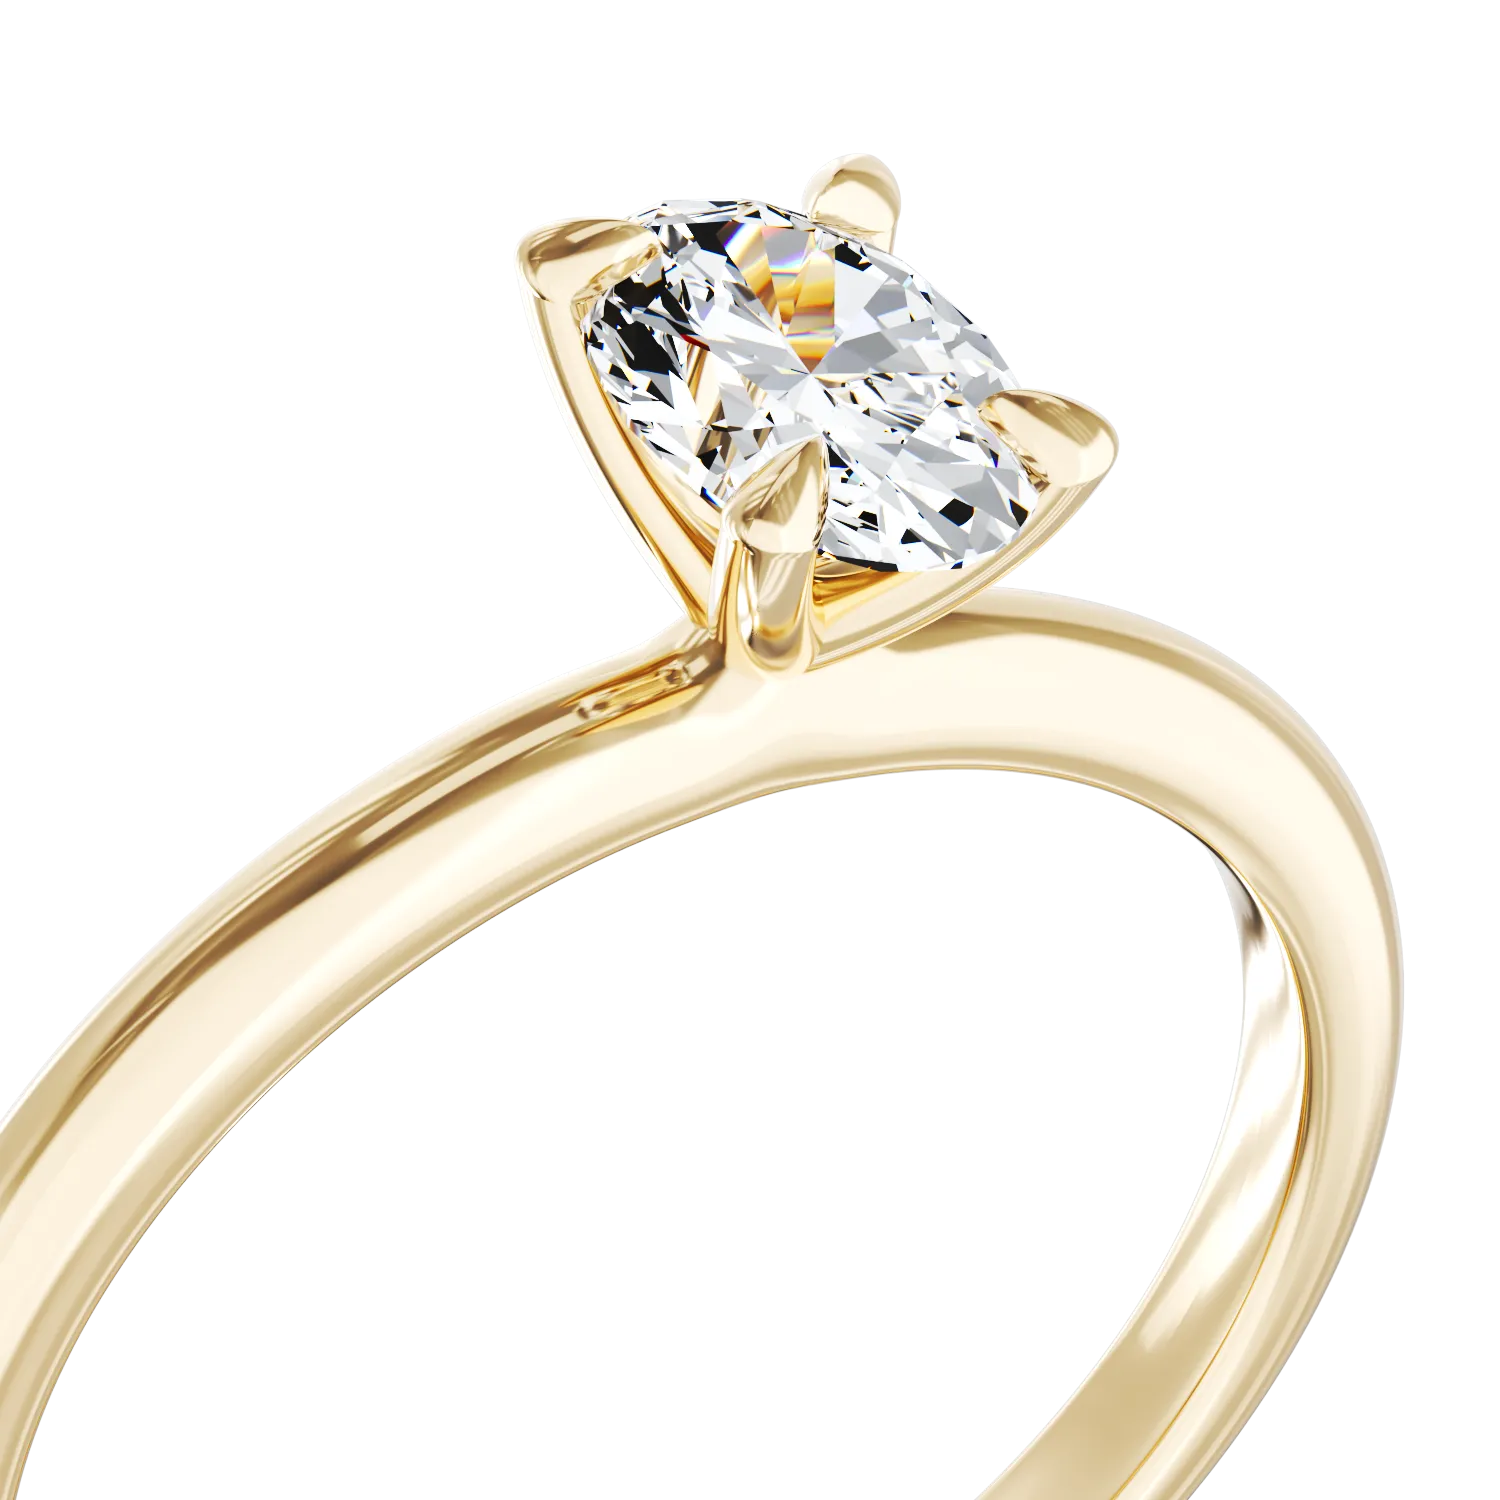 18K yellow gold engagement ring with a 0.3ct solitaire diamond